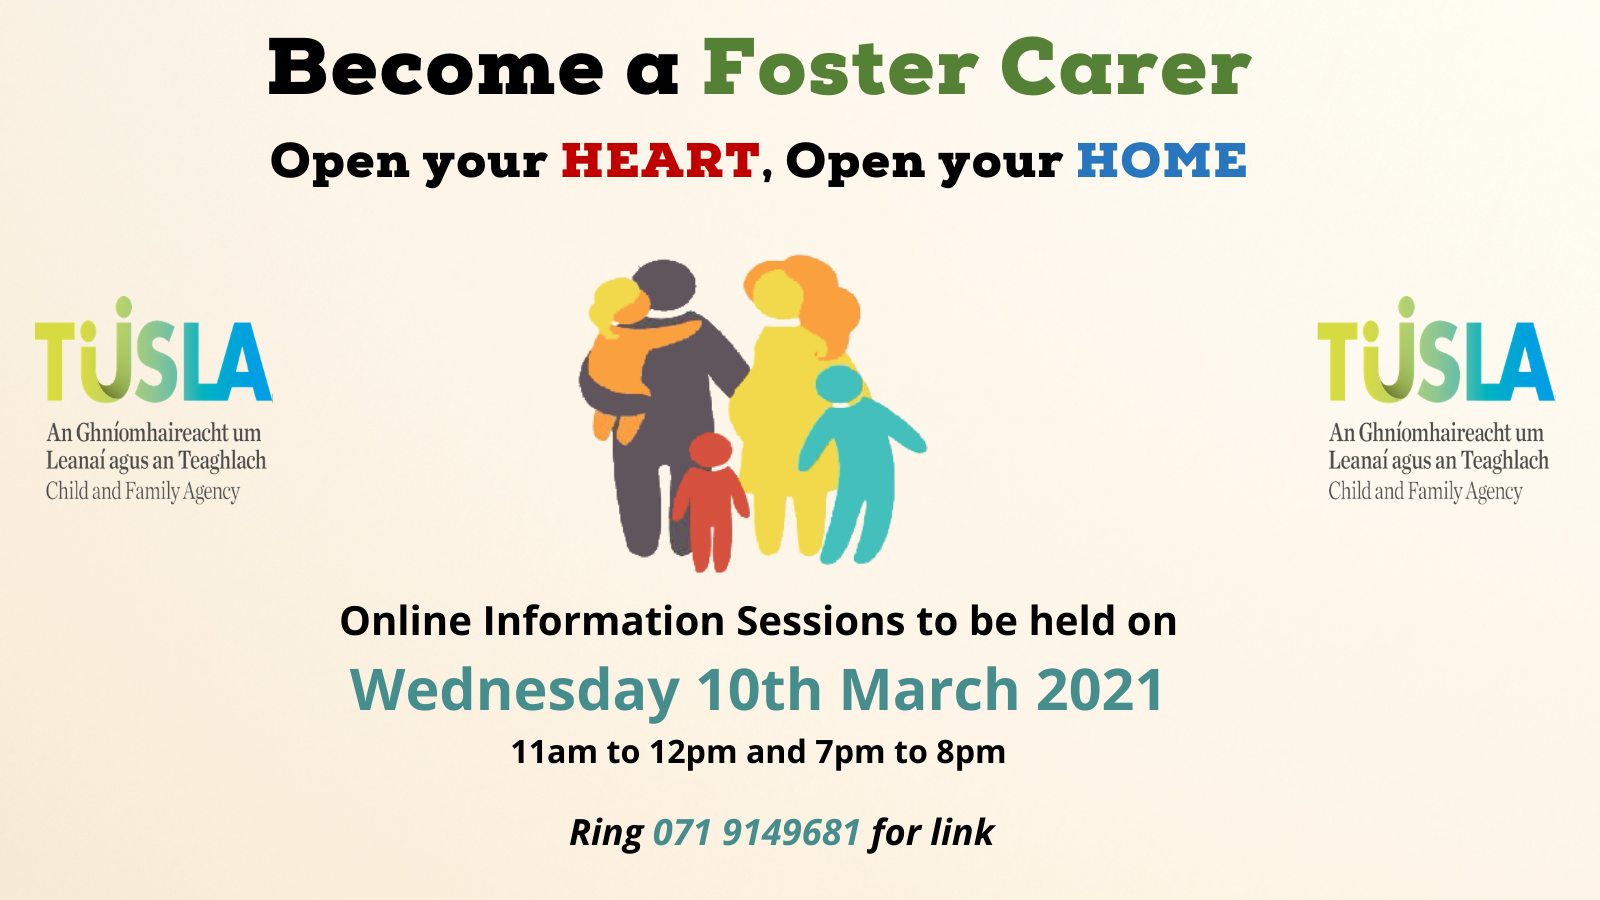 Become a Foster Carer